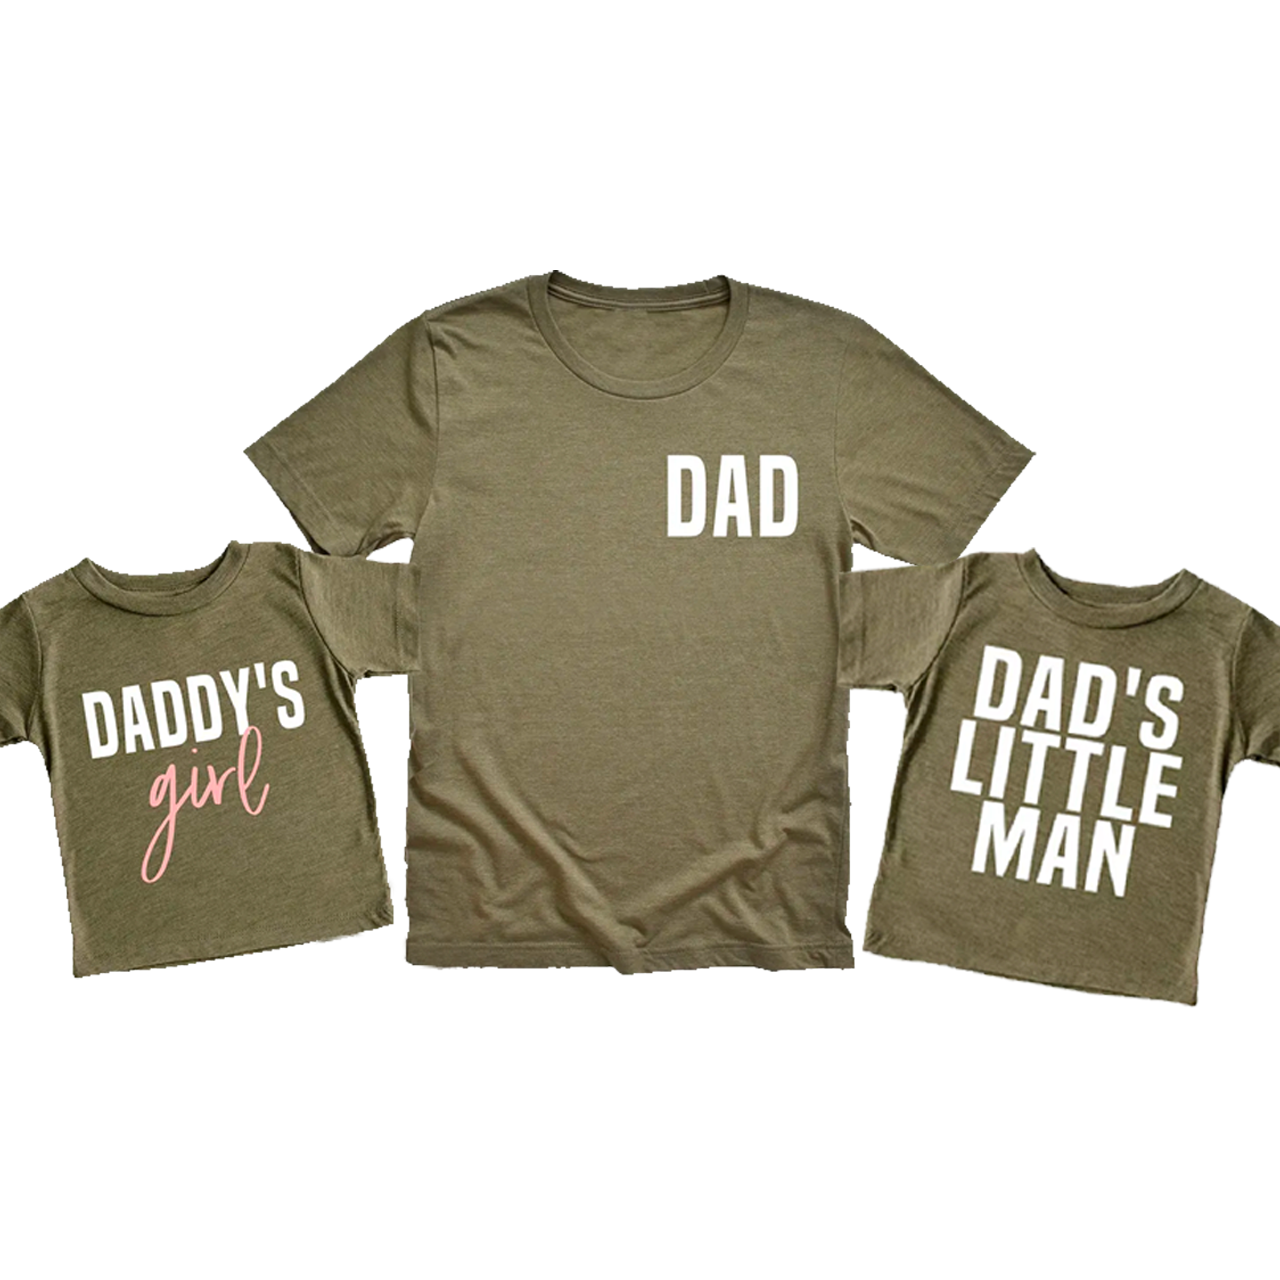 Dad&Dad's Little Man T-Shirts For Dad And Me